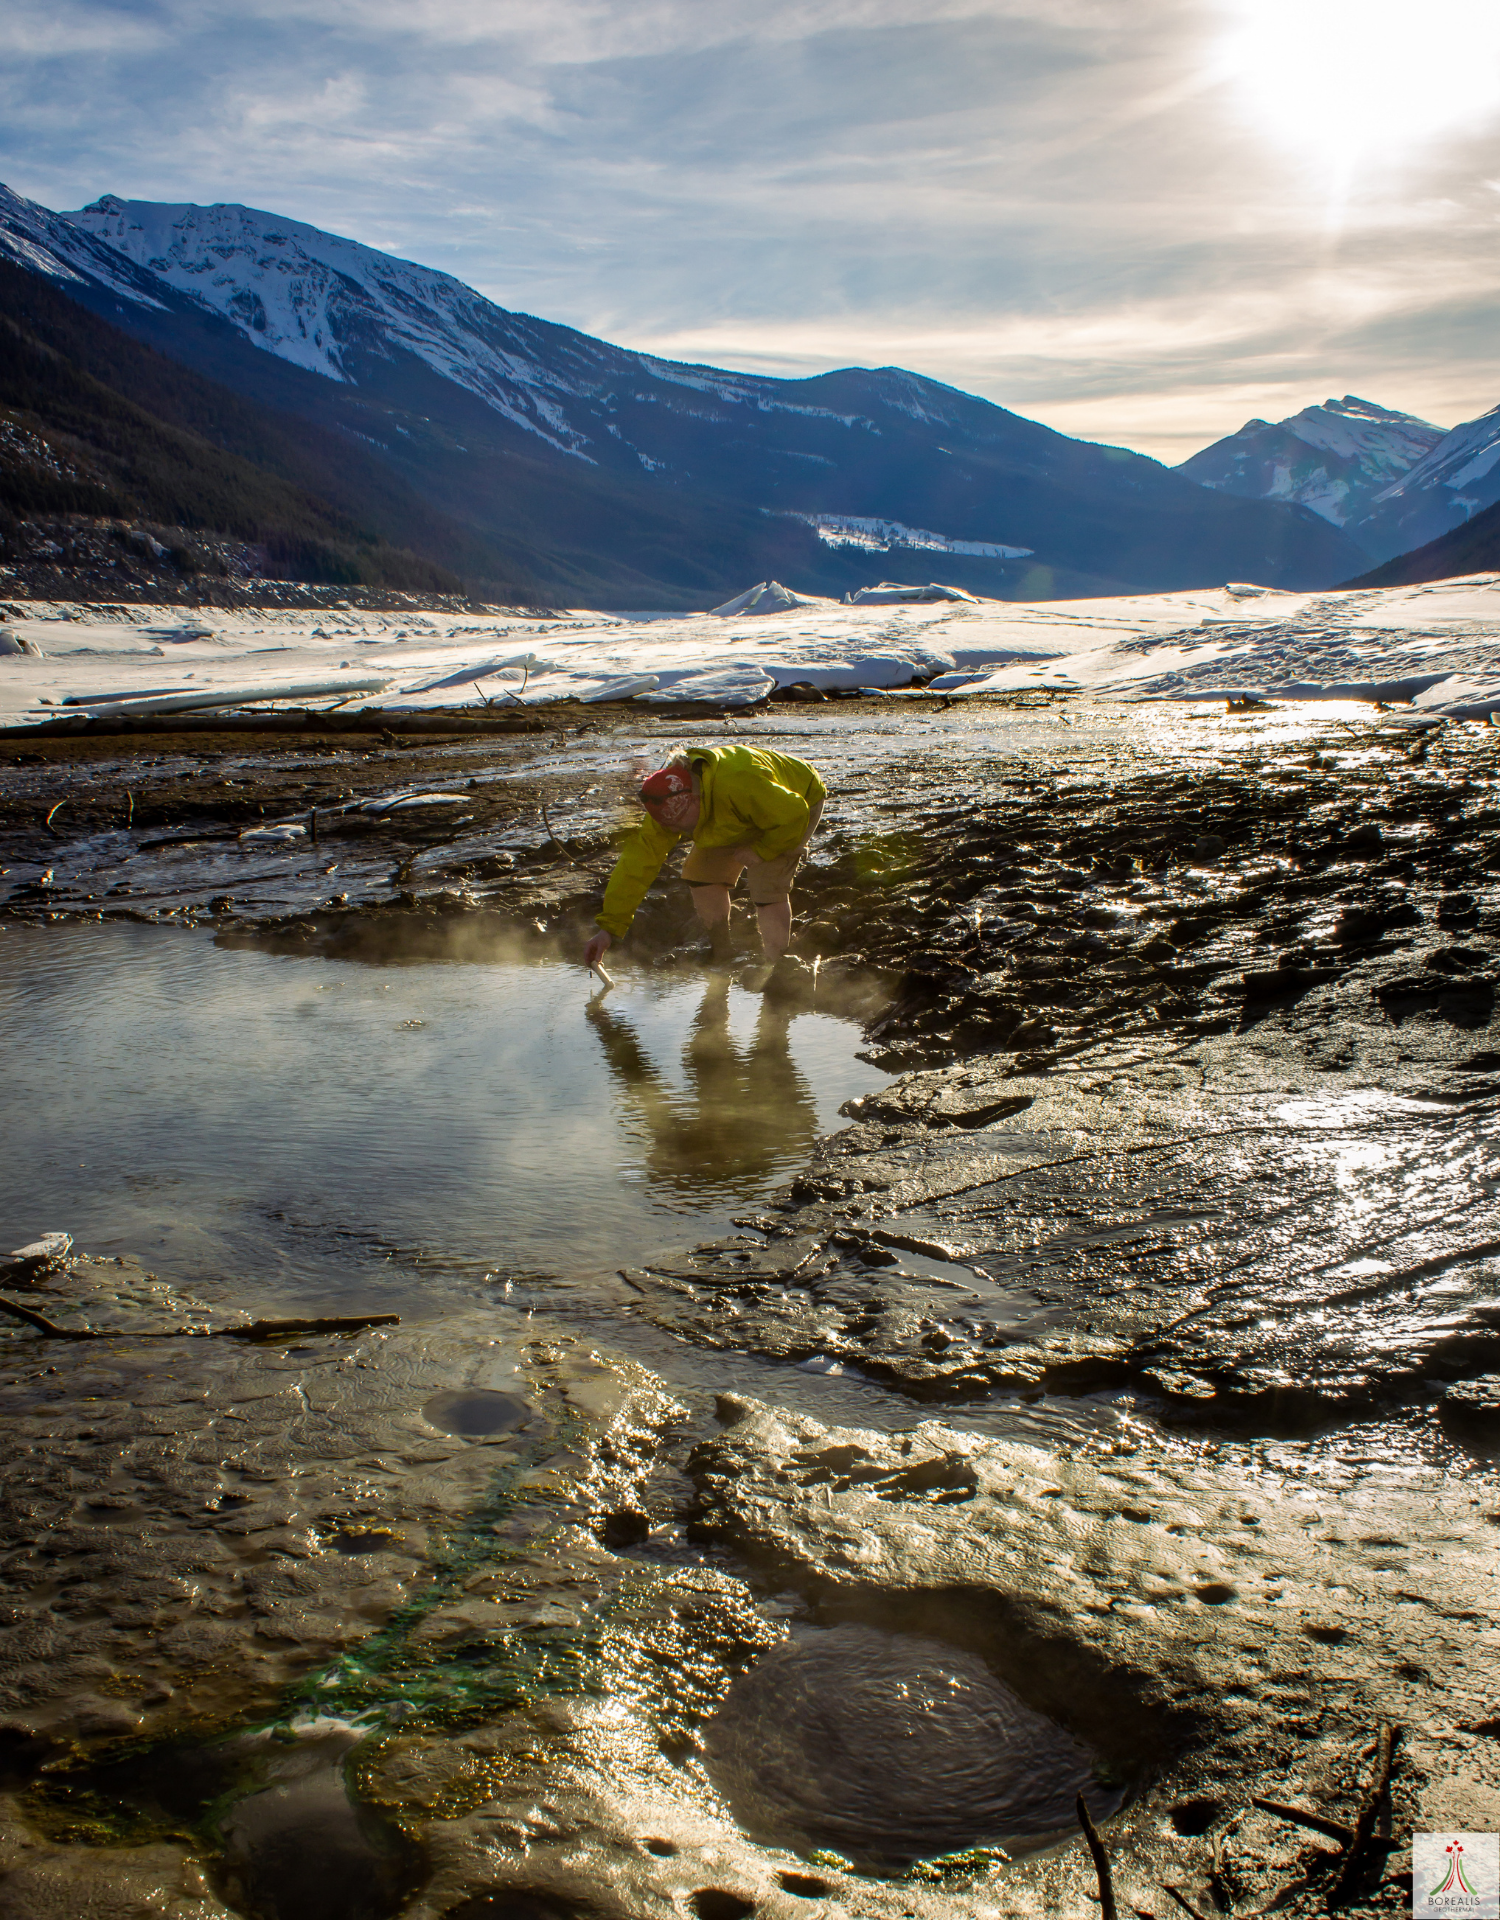 A picture containing a single person in a yellow-green jacket reaching down to get a sample of steaming water from a hot spring pool. Around the hot water pool is mud and a rock foundation that has holes with hot water. Behind the dirt, snow goes up to the tree-filled mountains. The sun shines on the camera, and the clouds appear like wrinkles in the sky.